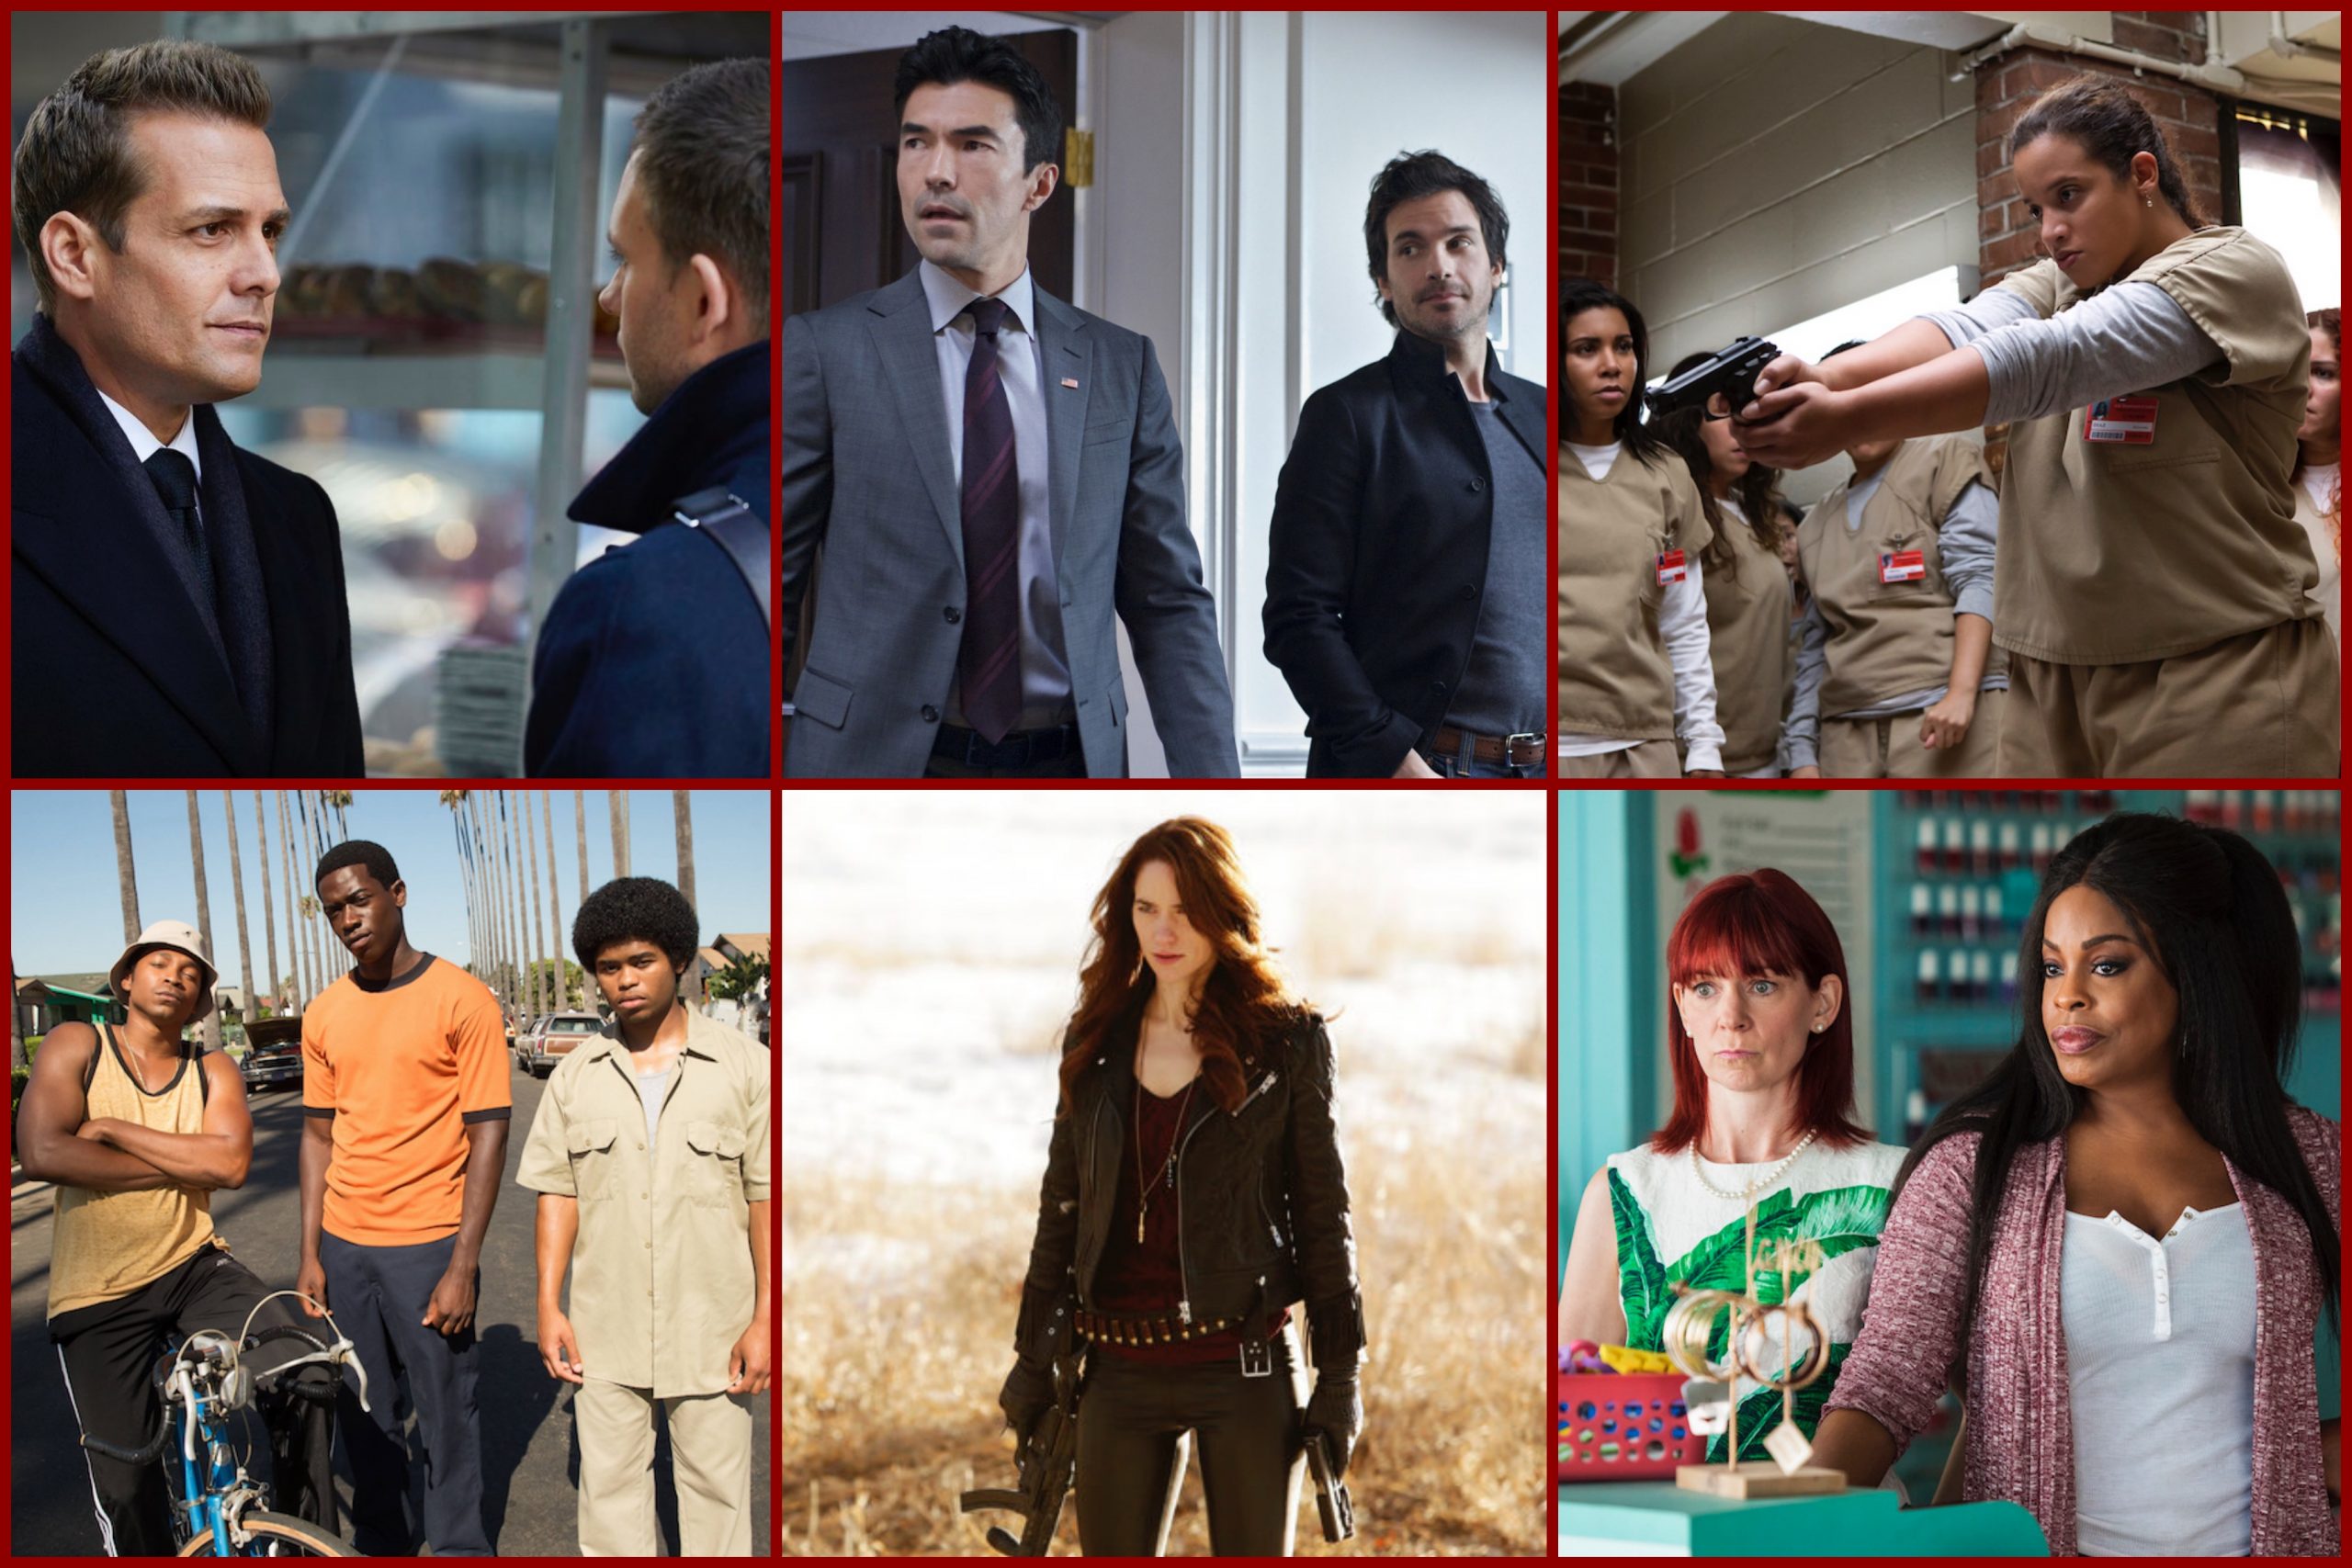 21 TV Shows You Should Watch This Summer